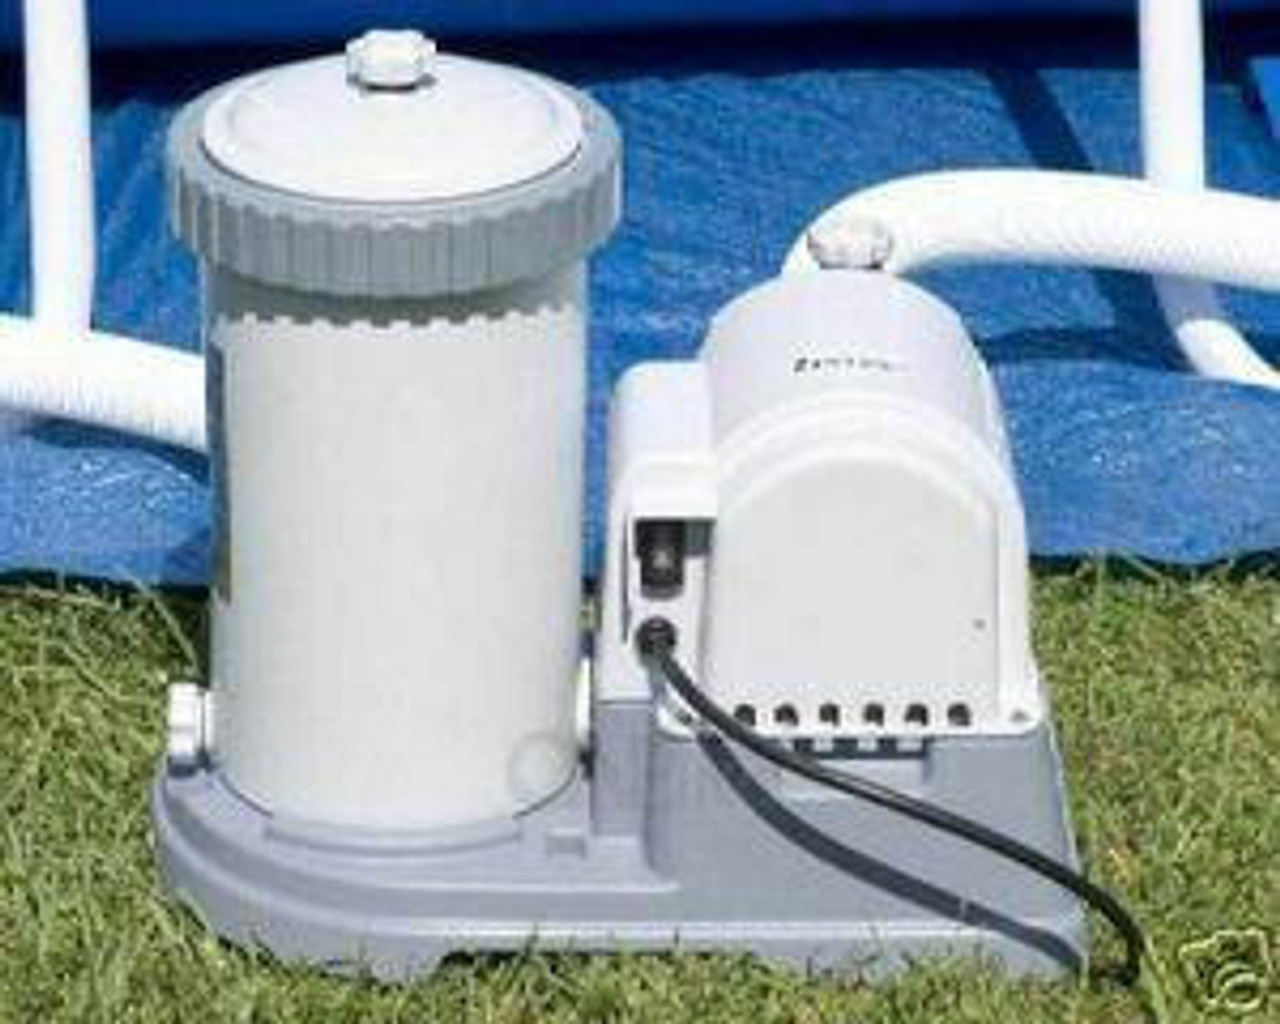 Intex Above Ground Pool Filter Pump with 2500 GPH Model on Pool and Spa Supply Store